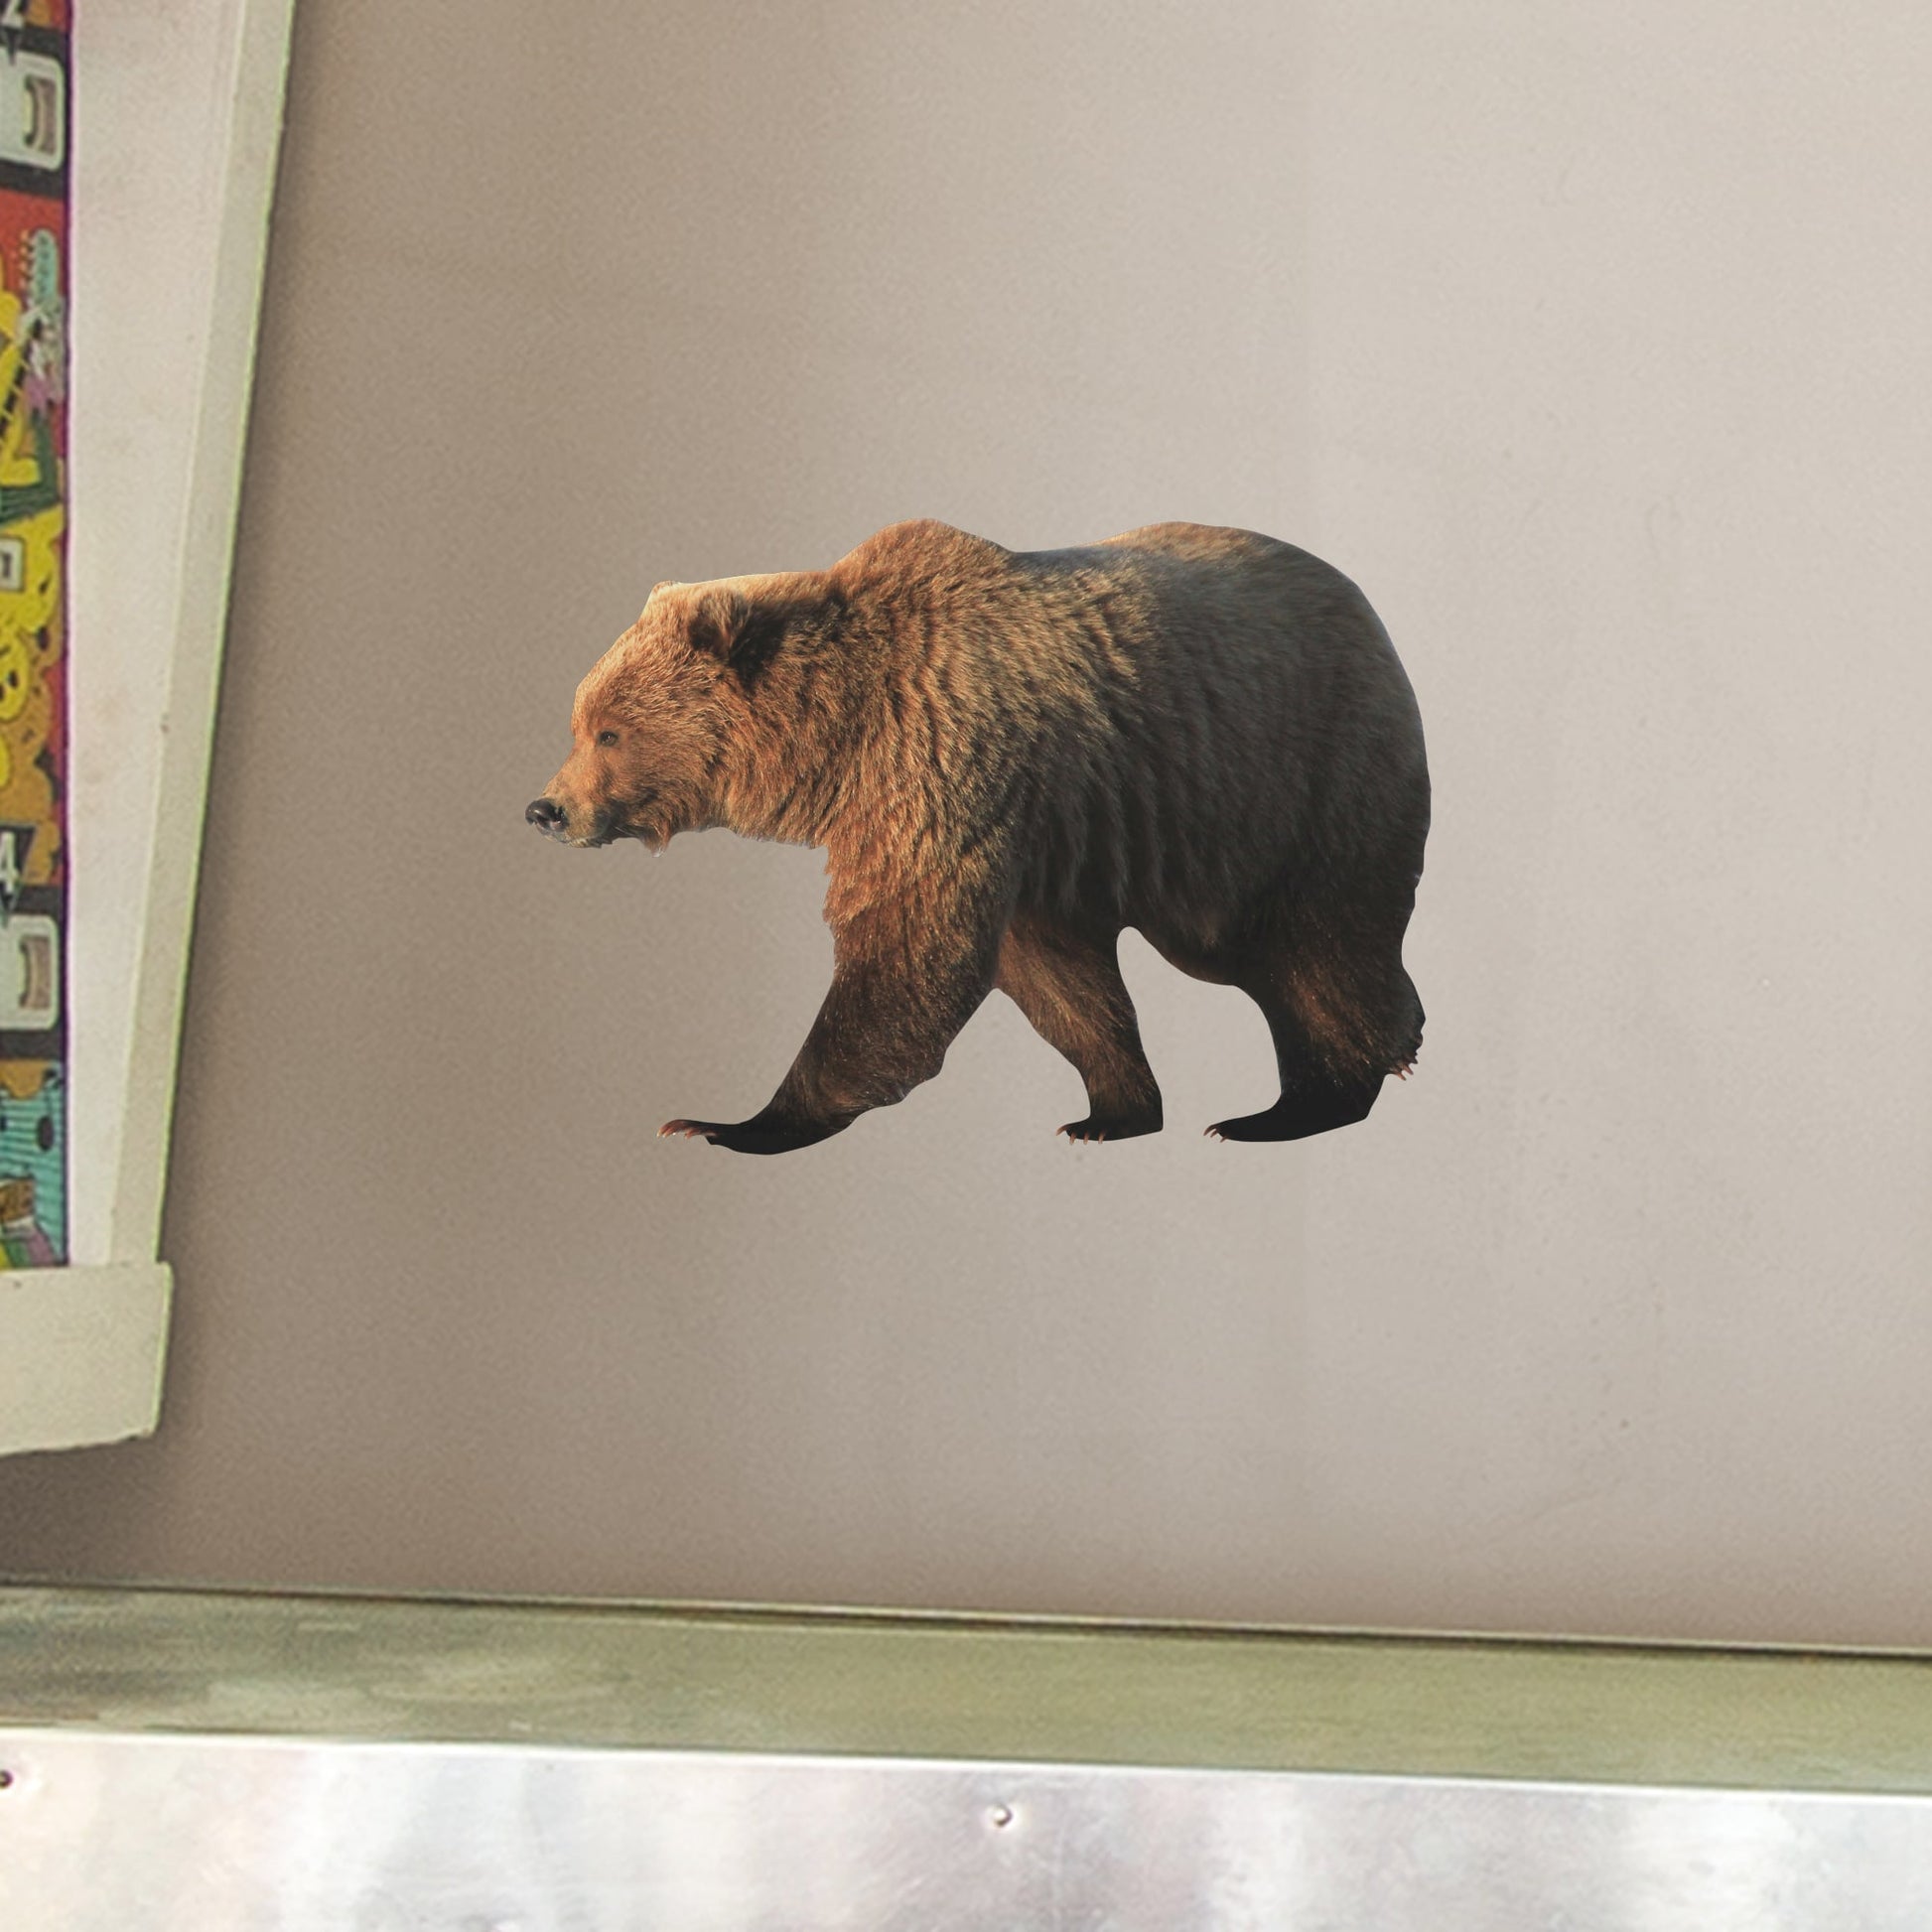 Giant Animal + 2 Decals (51"W x 36"H)